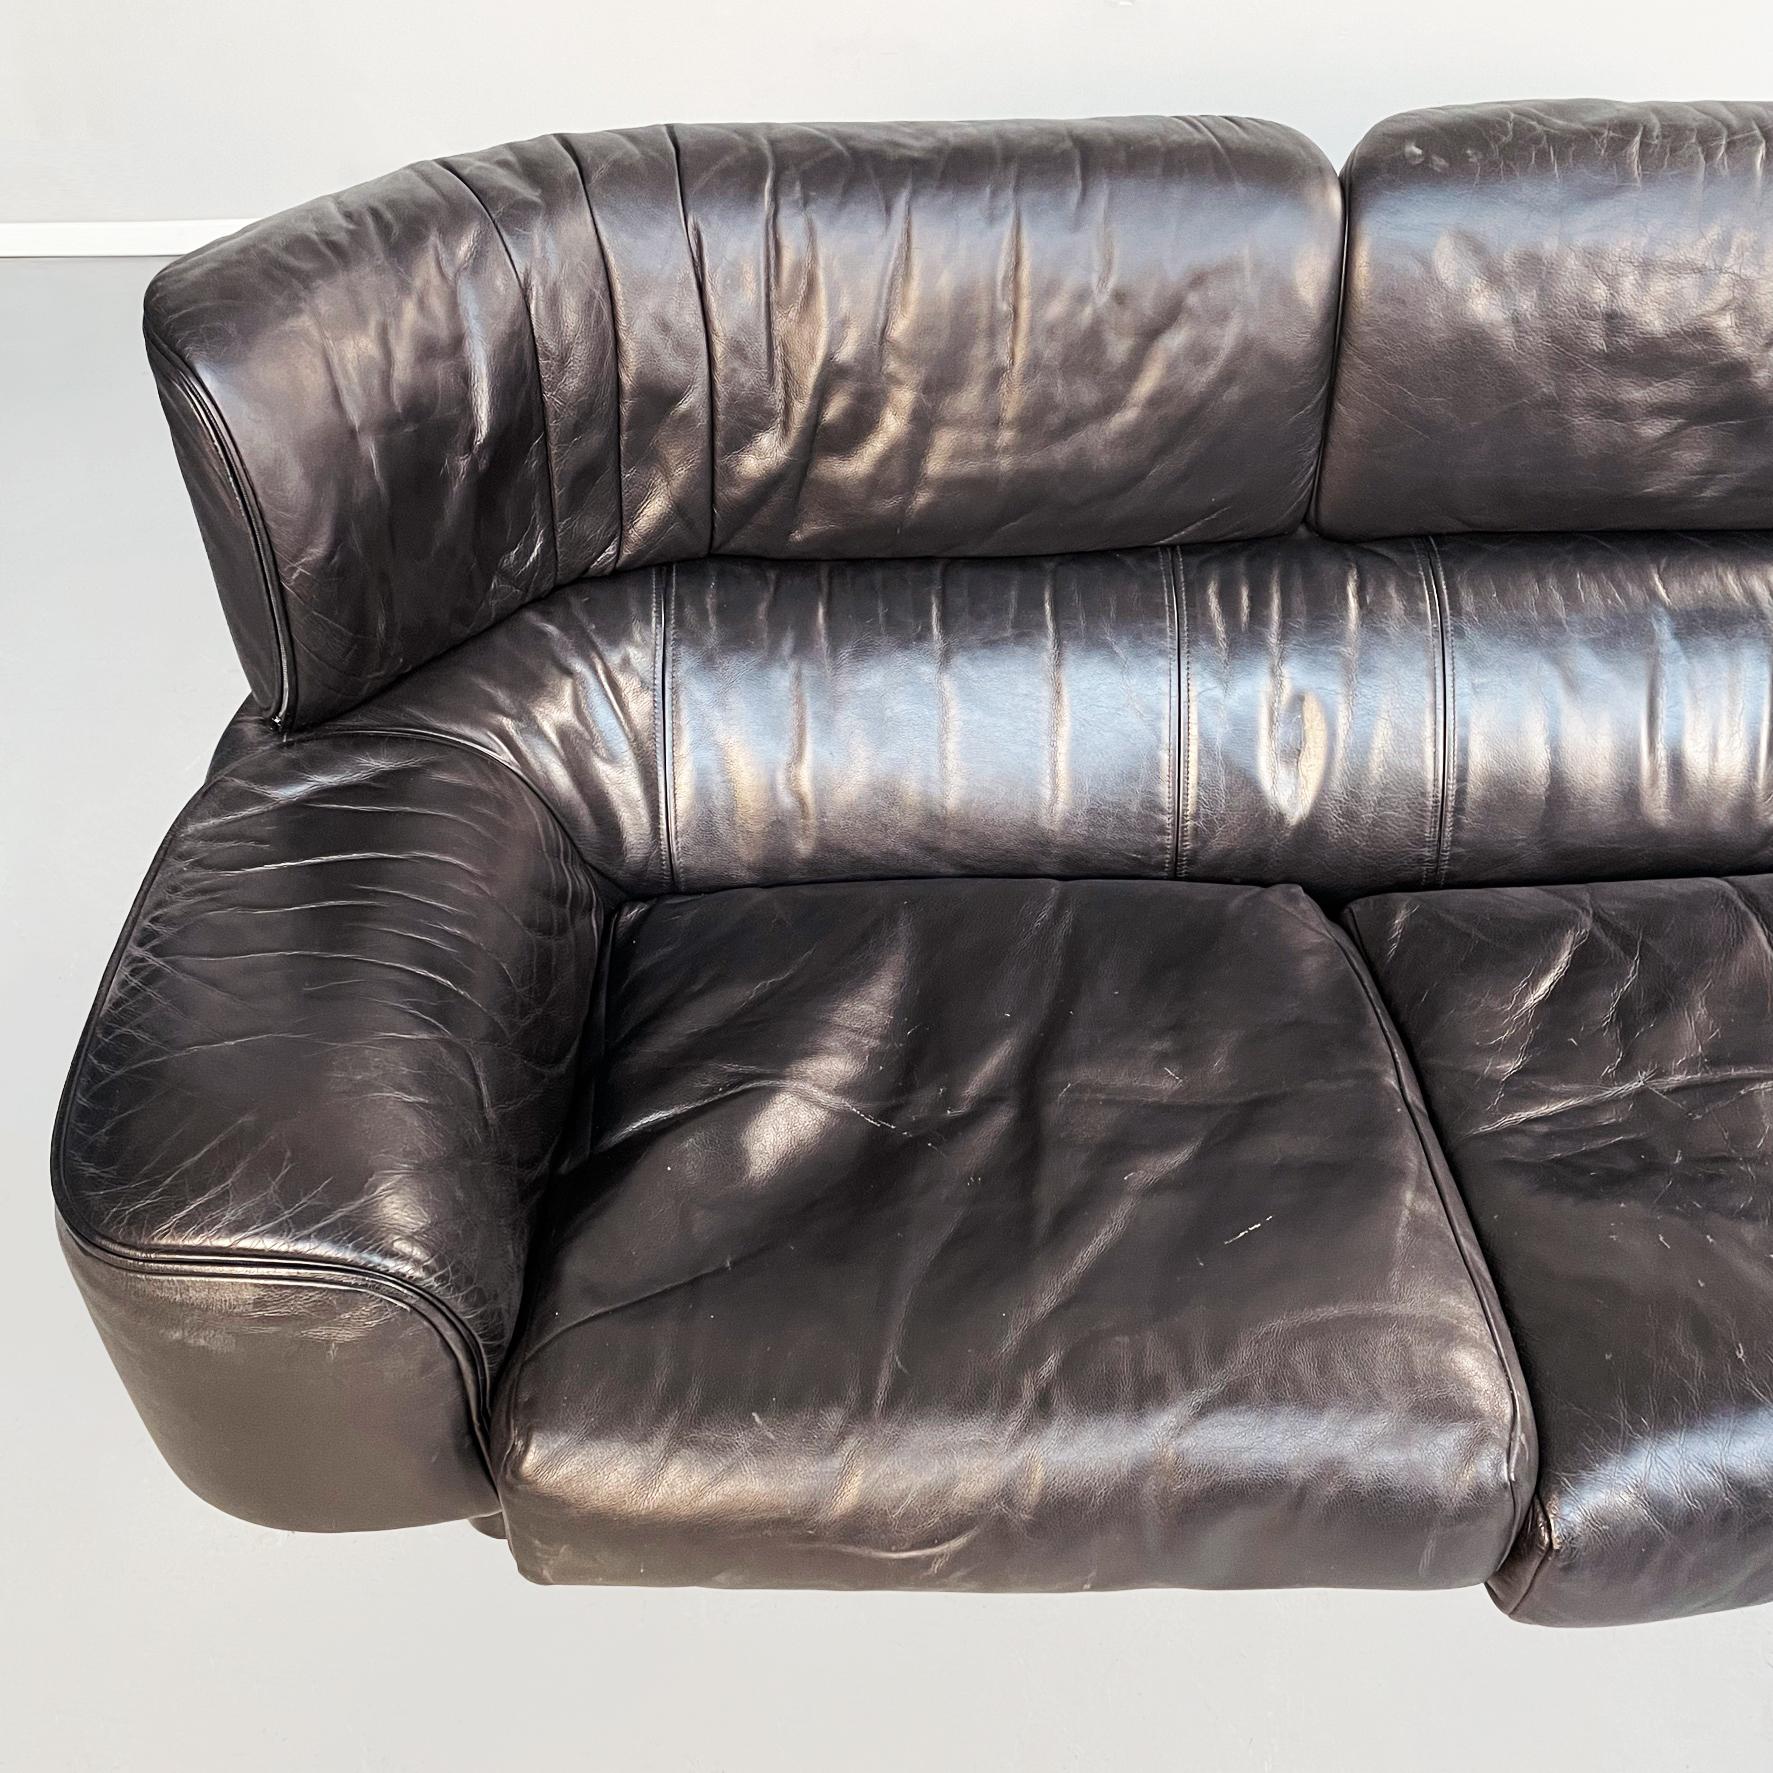 Italian Modern Black Leather Wood 3seat Sofa Bull by Frattini for Cassina, 1980s For Sale 1